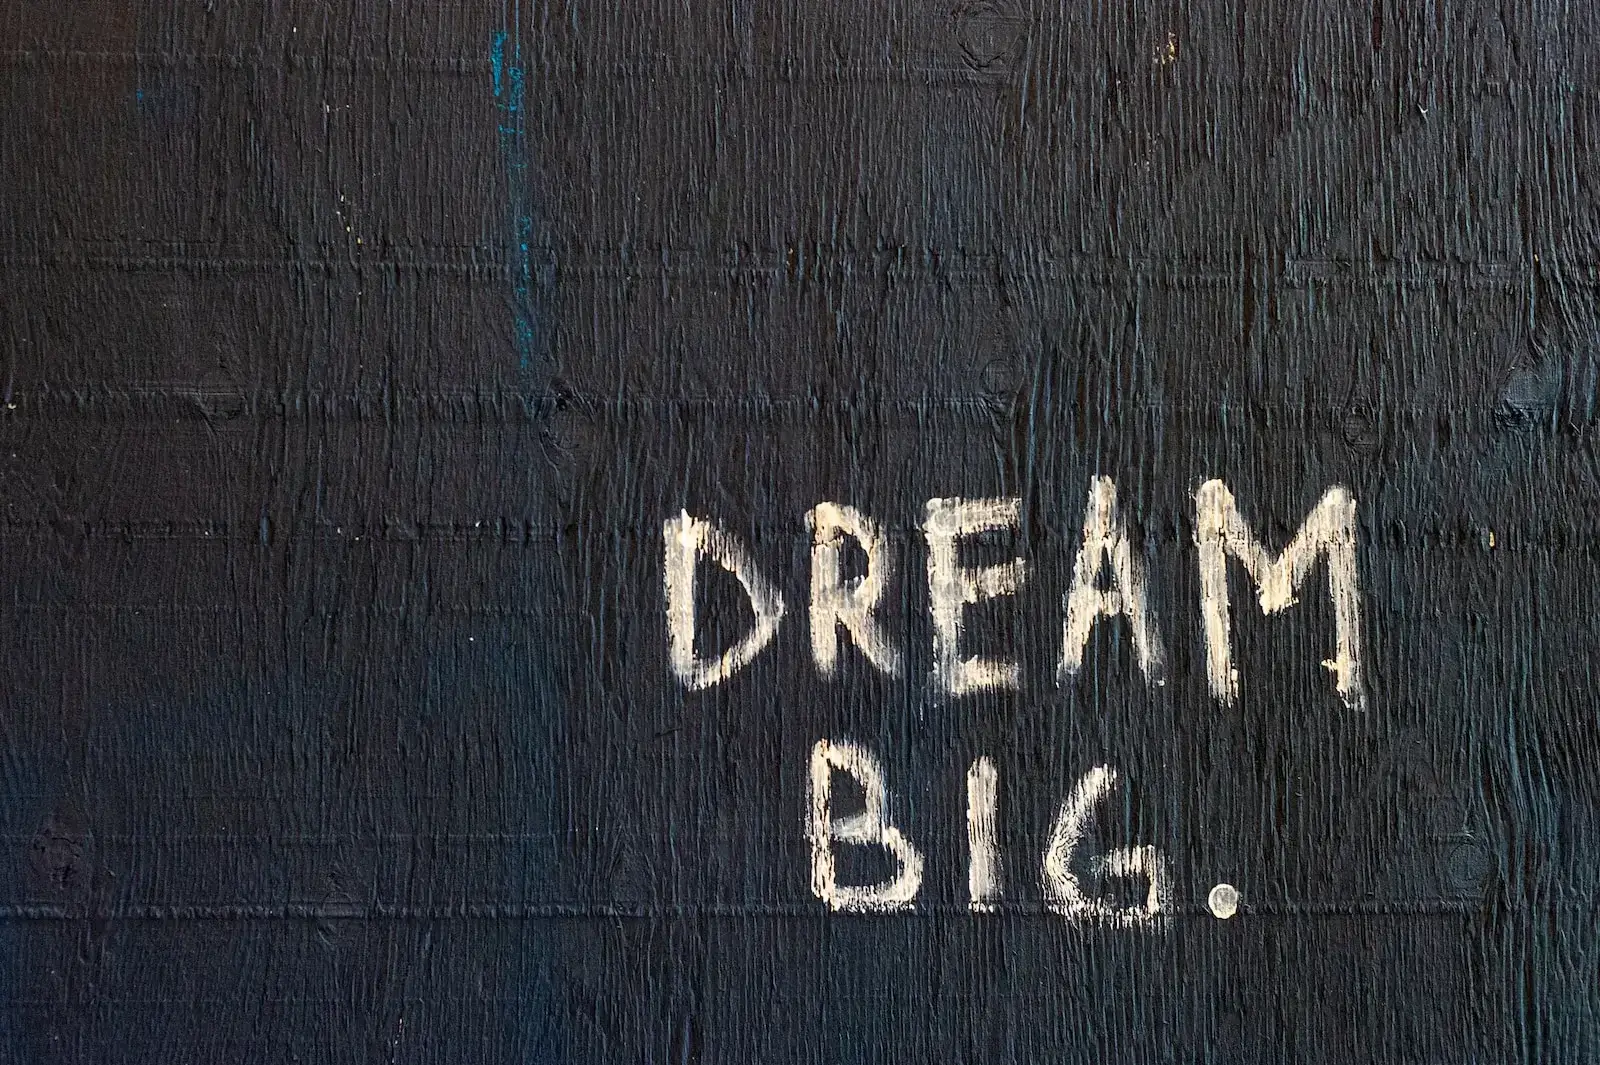 The Motivational quote dream big